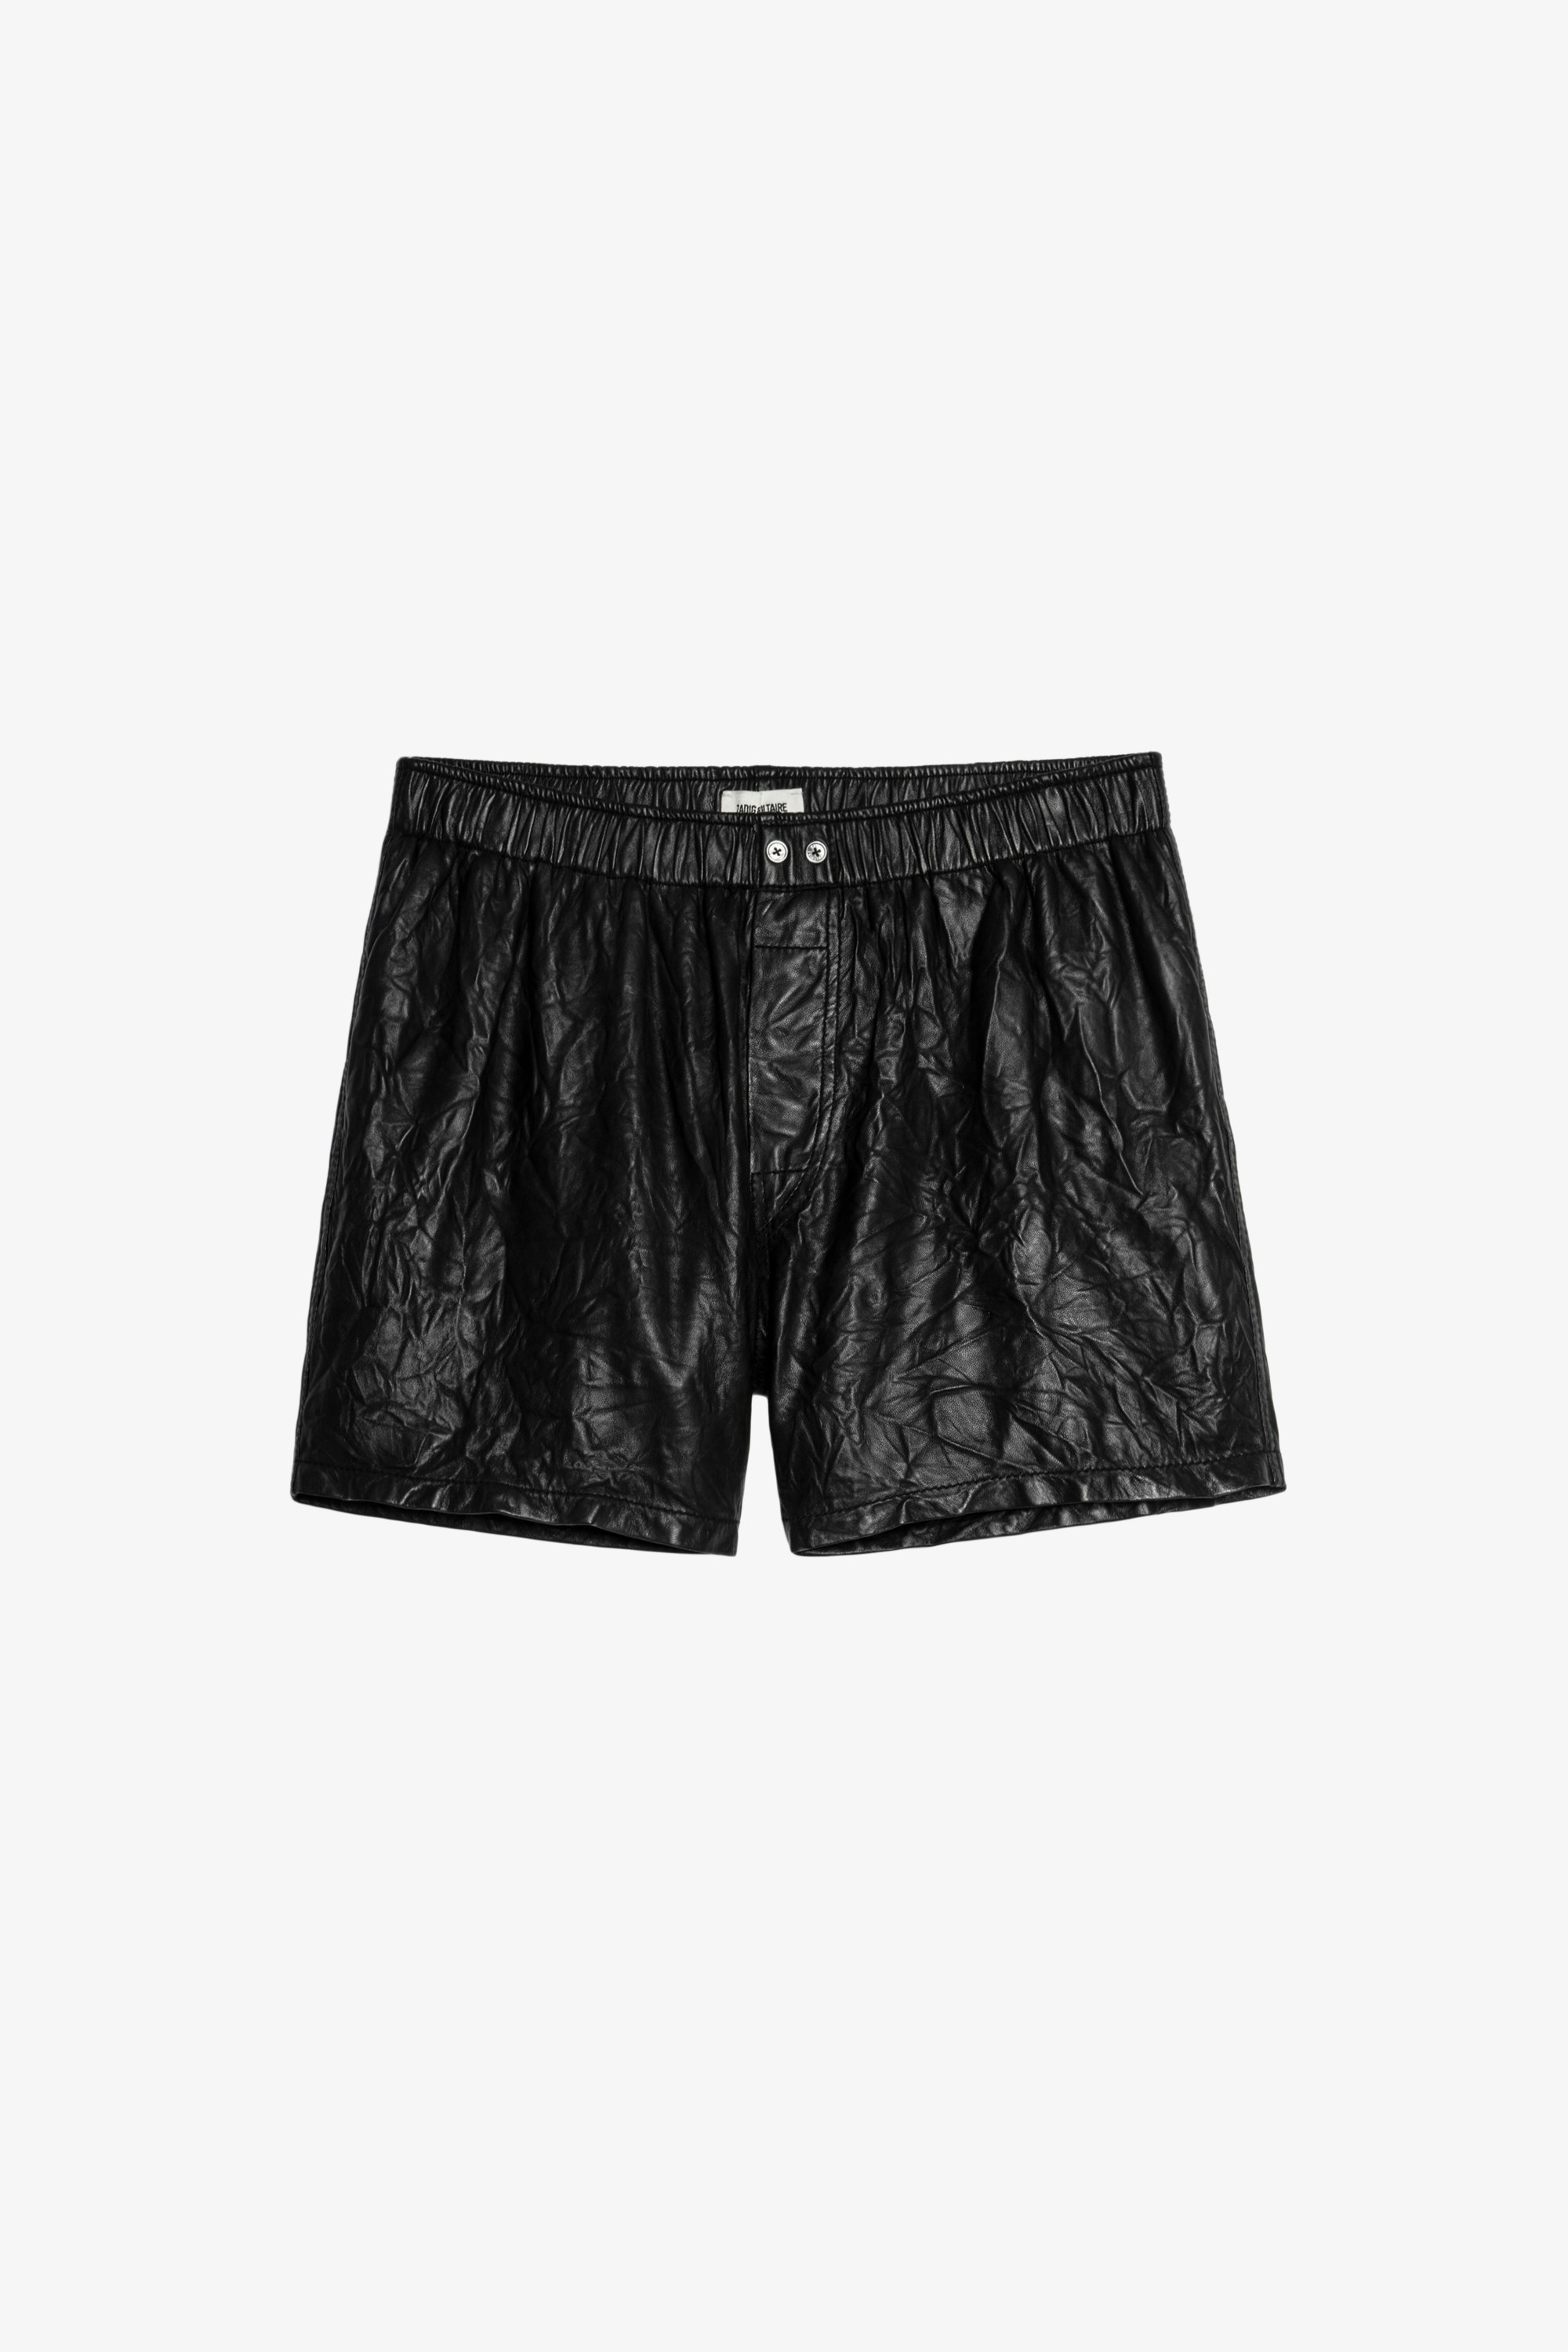 Pax Shorts Crinkled Leather Women’s black leather shorts.